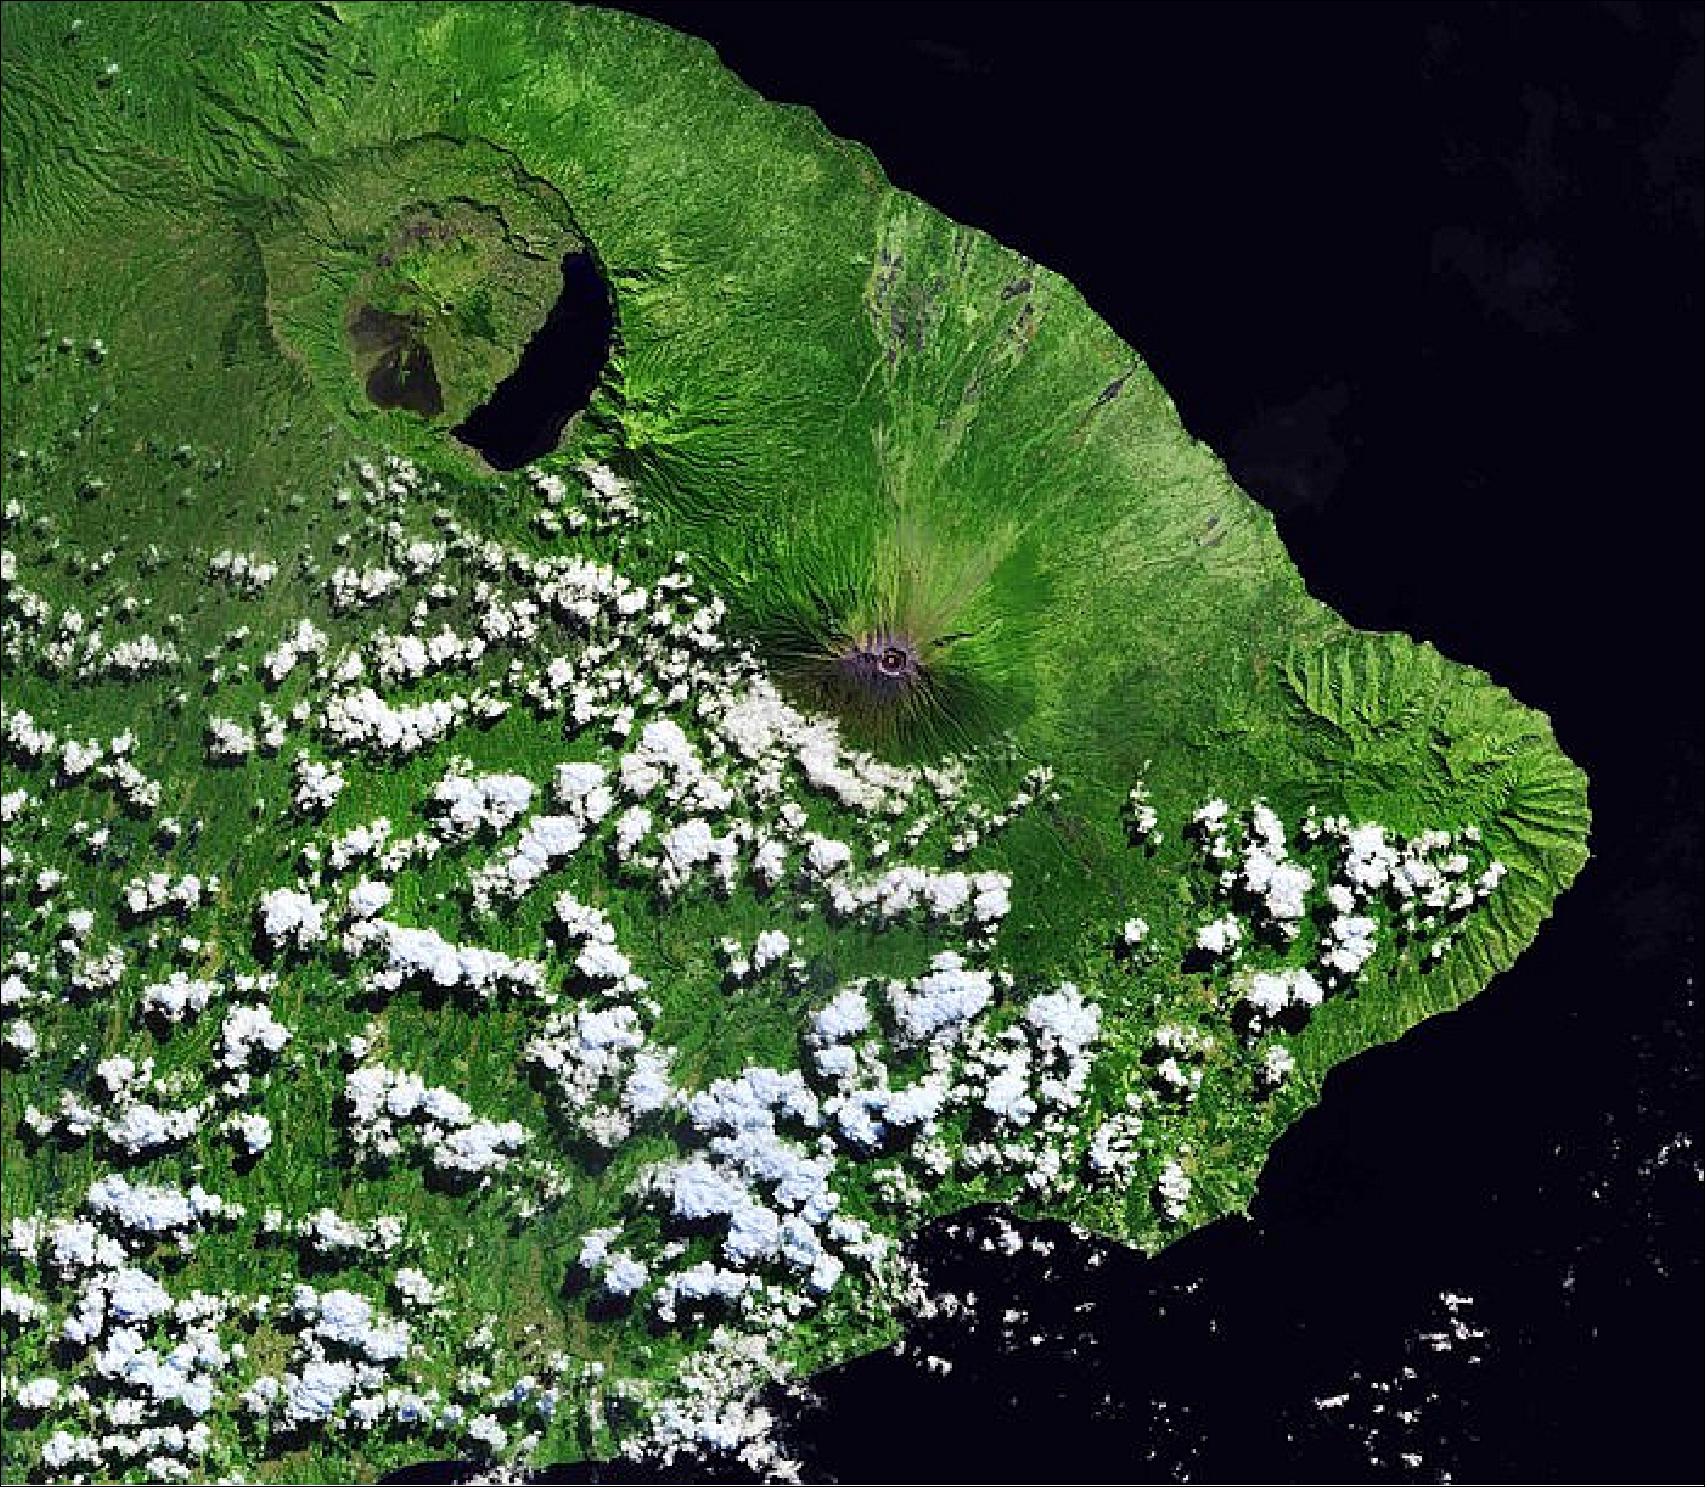 Figure 27: Dotted with clouds, Mount Seraya is visible on the peninsula that juts to the east. Its volcanic rock creates a rugged terrain, but is surrounded by lush vegetation. The area is well known for its many Hindu temples, including the famous Lempuyang Temple, known locally as Pura Luhur Lempuyang. This image of Sentinel-2, captured on 2 July 2018, is also featured on the Earth from Space video program (image credit: ESA, the image contains modified Copernicus Sentinel data (2018), processed by ESA, CC BY-SA 3.0 IGO)